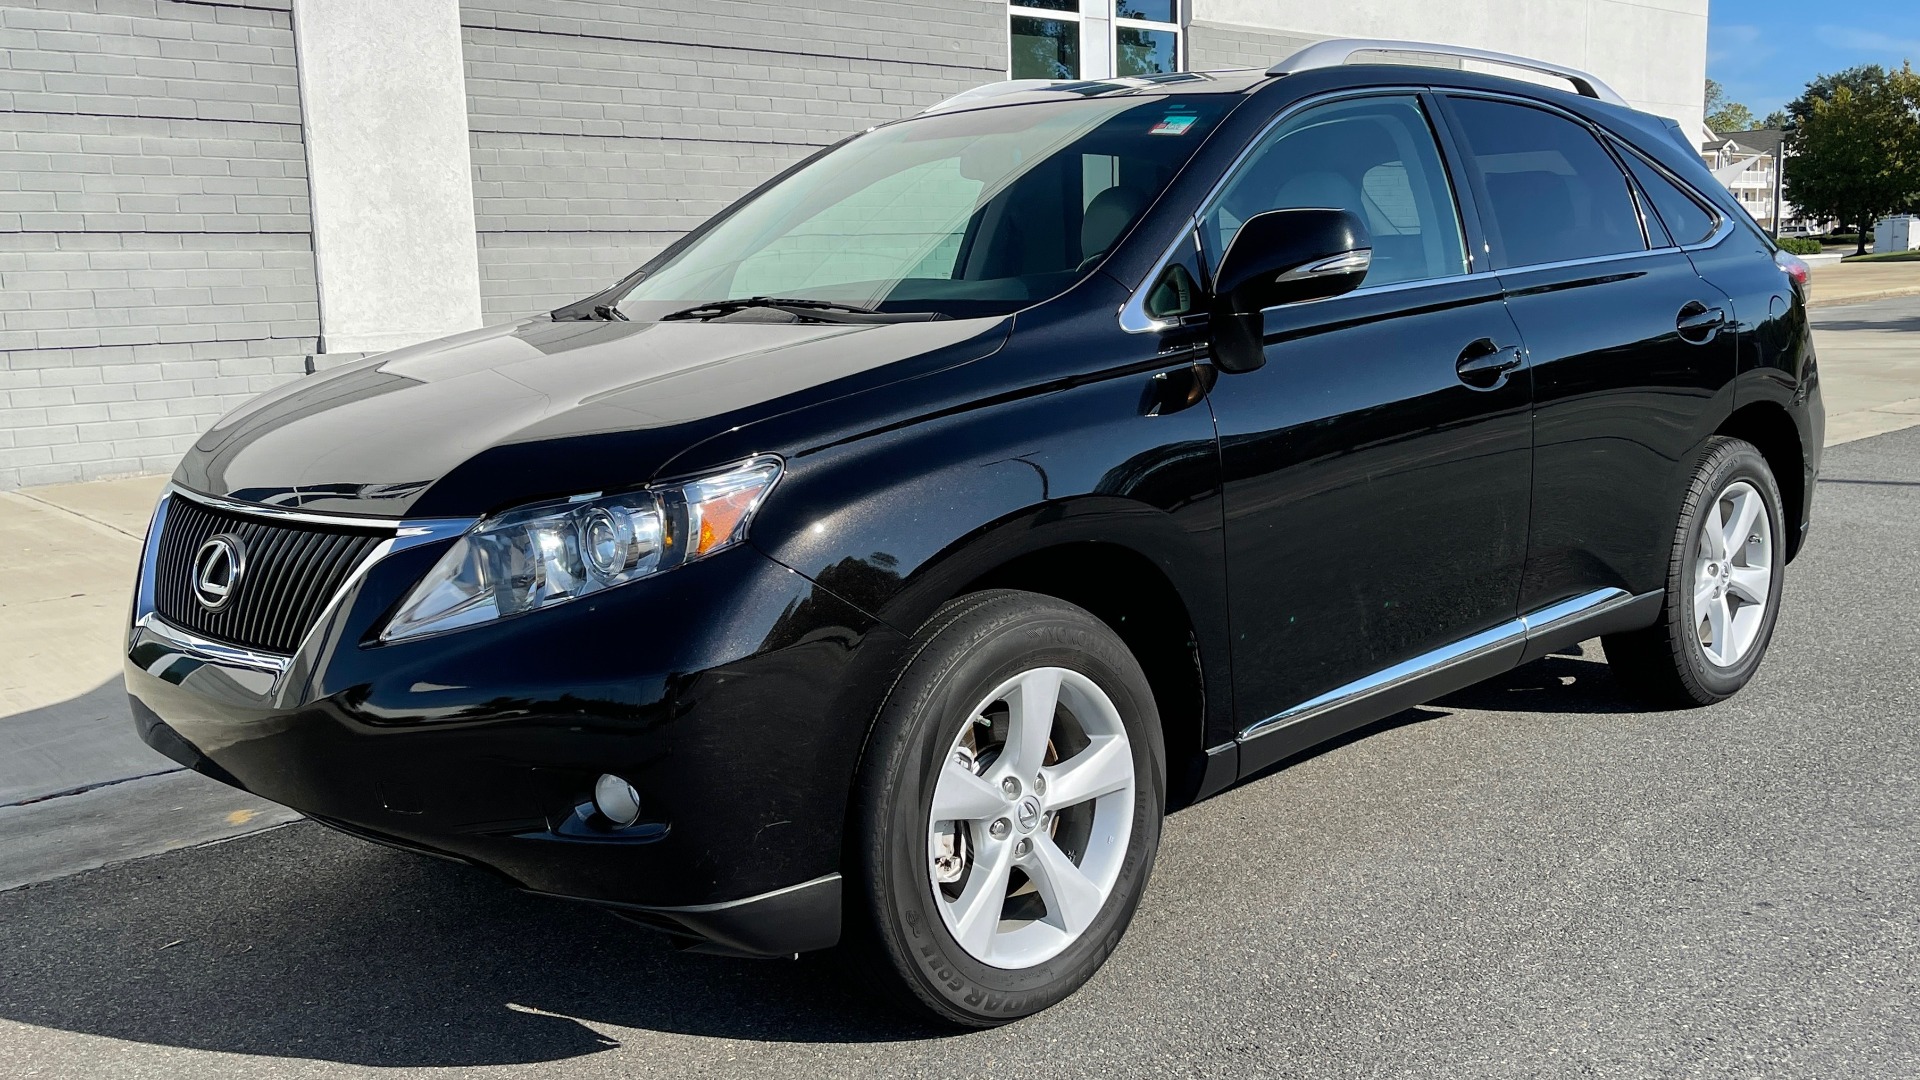 Used 2011 Lexus RX 350 PREMIUM / TOWING PREP PKG / VENTILATED STS / SUNROOF / REARVIEW for sale Sold at Formula Imports in Charlotte NC 28227 2